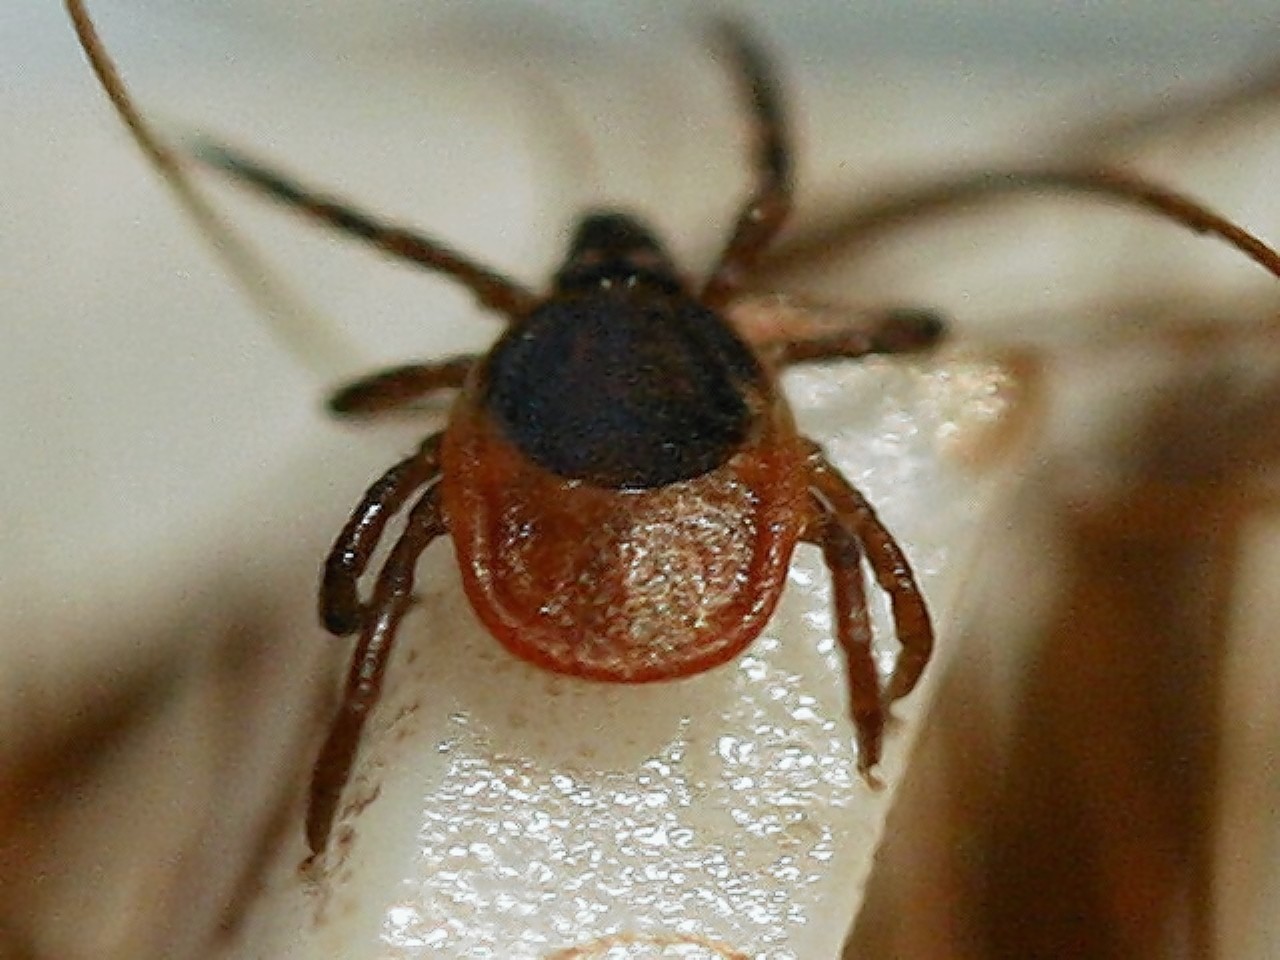 Lyme disease is caused by a bite from a tick